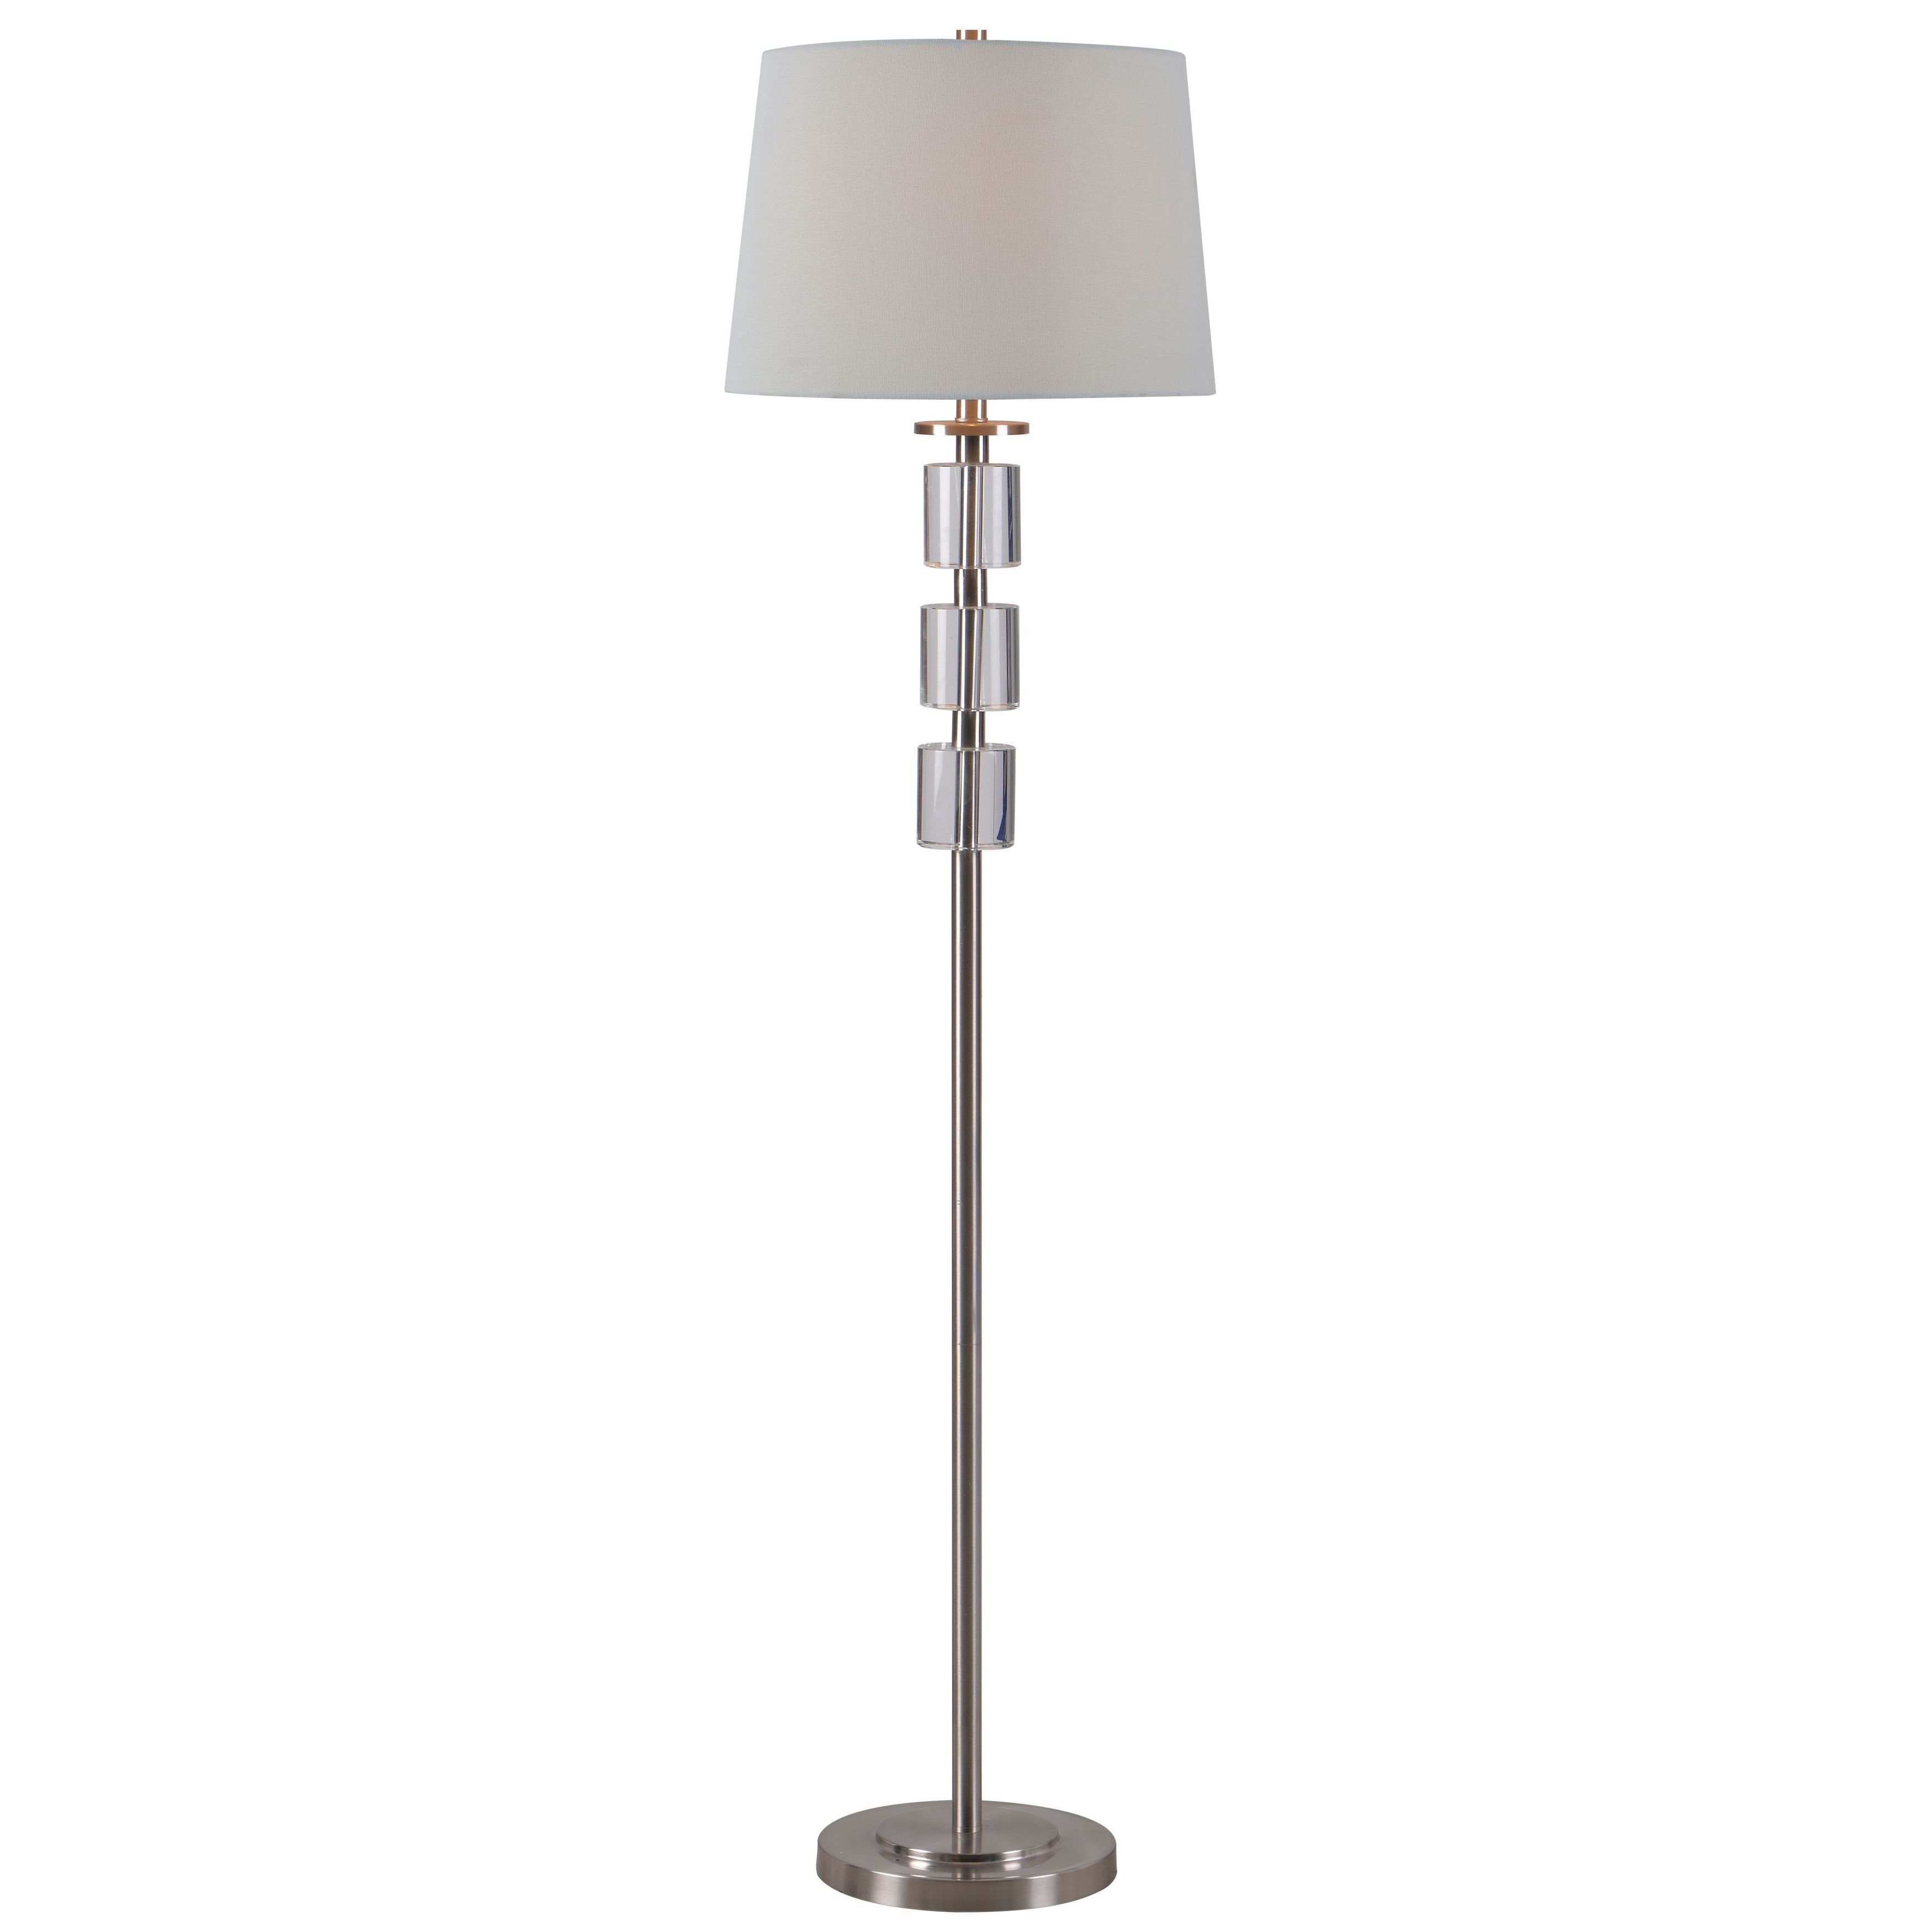 Crystal Floor Lamp Overstock Shopping The Best Deals within measurements 3500 X 3500